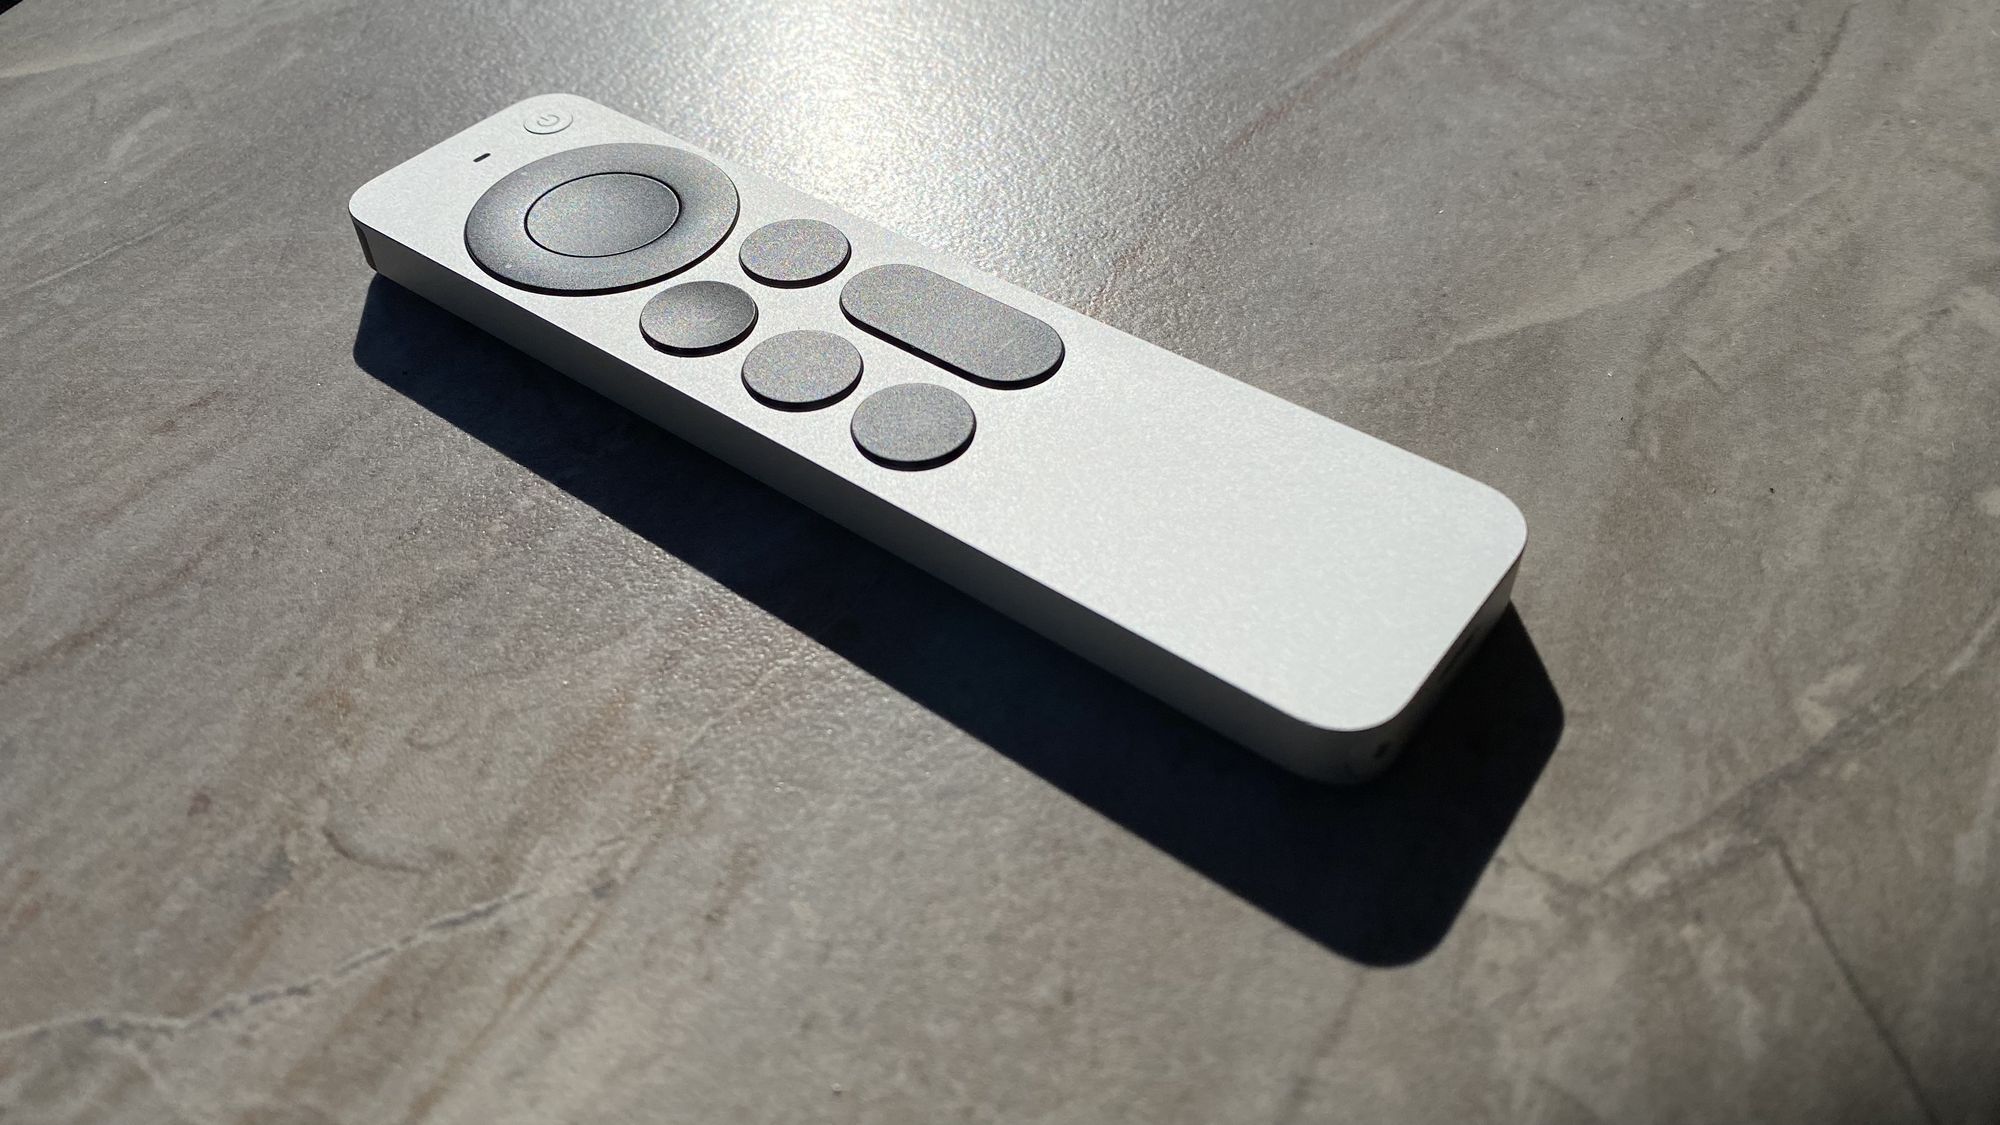 My Thoughts on Apple’s Redesigned Apple TV Remote